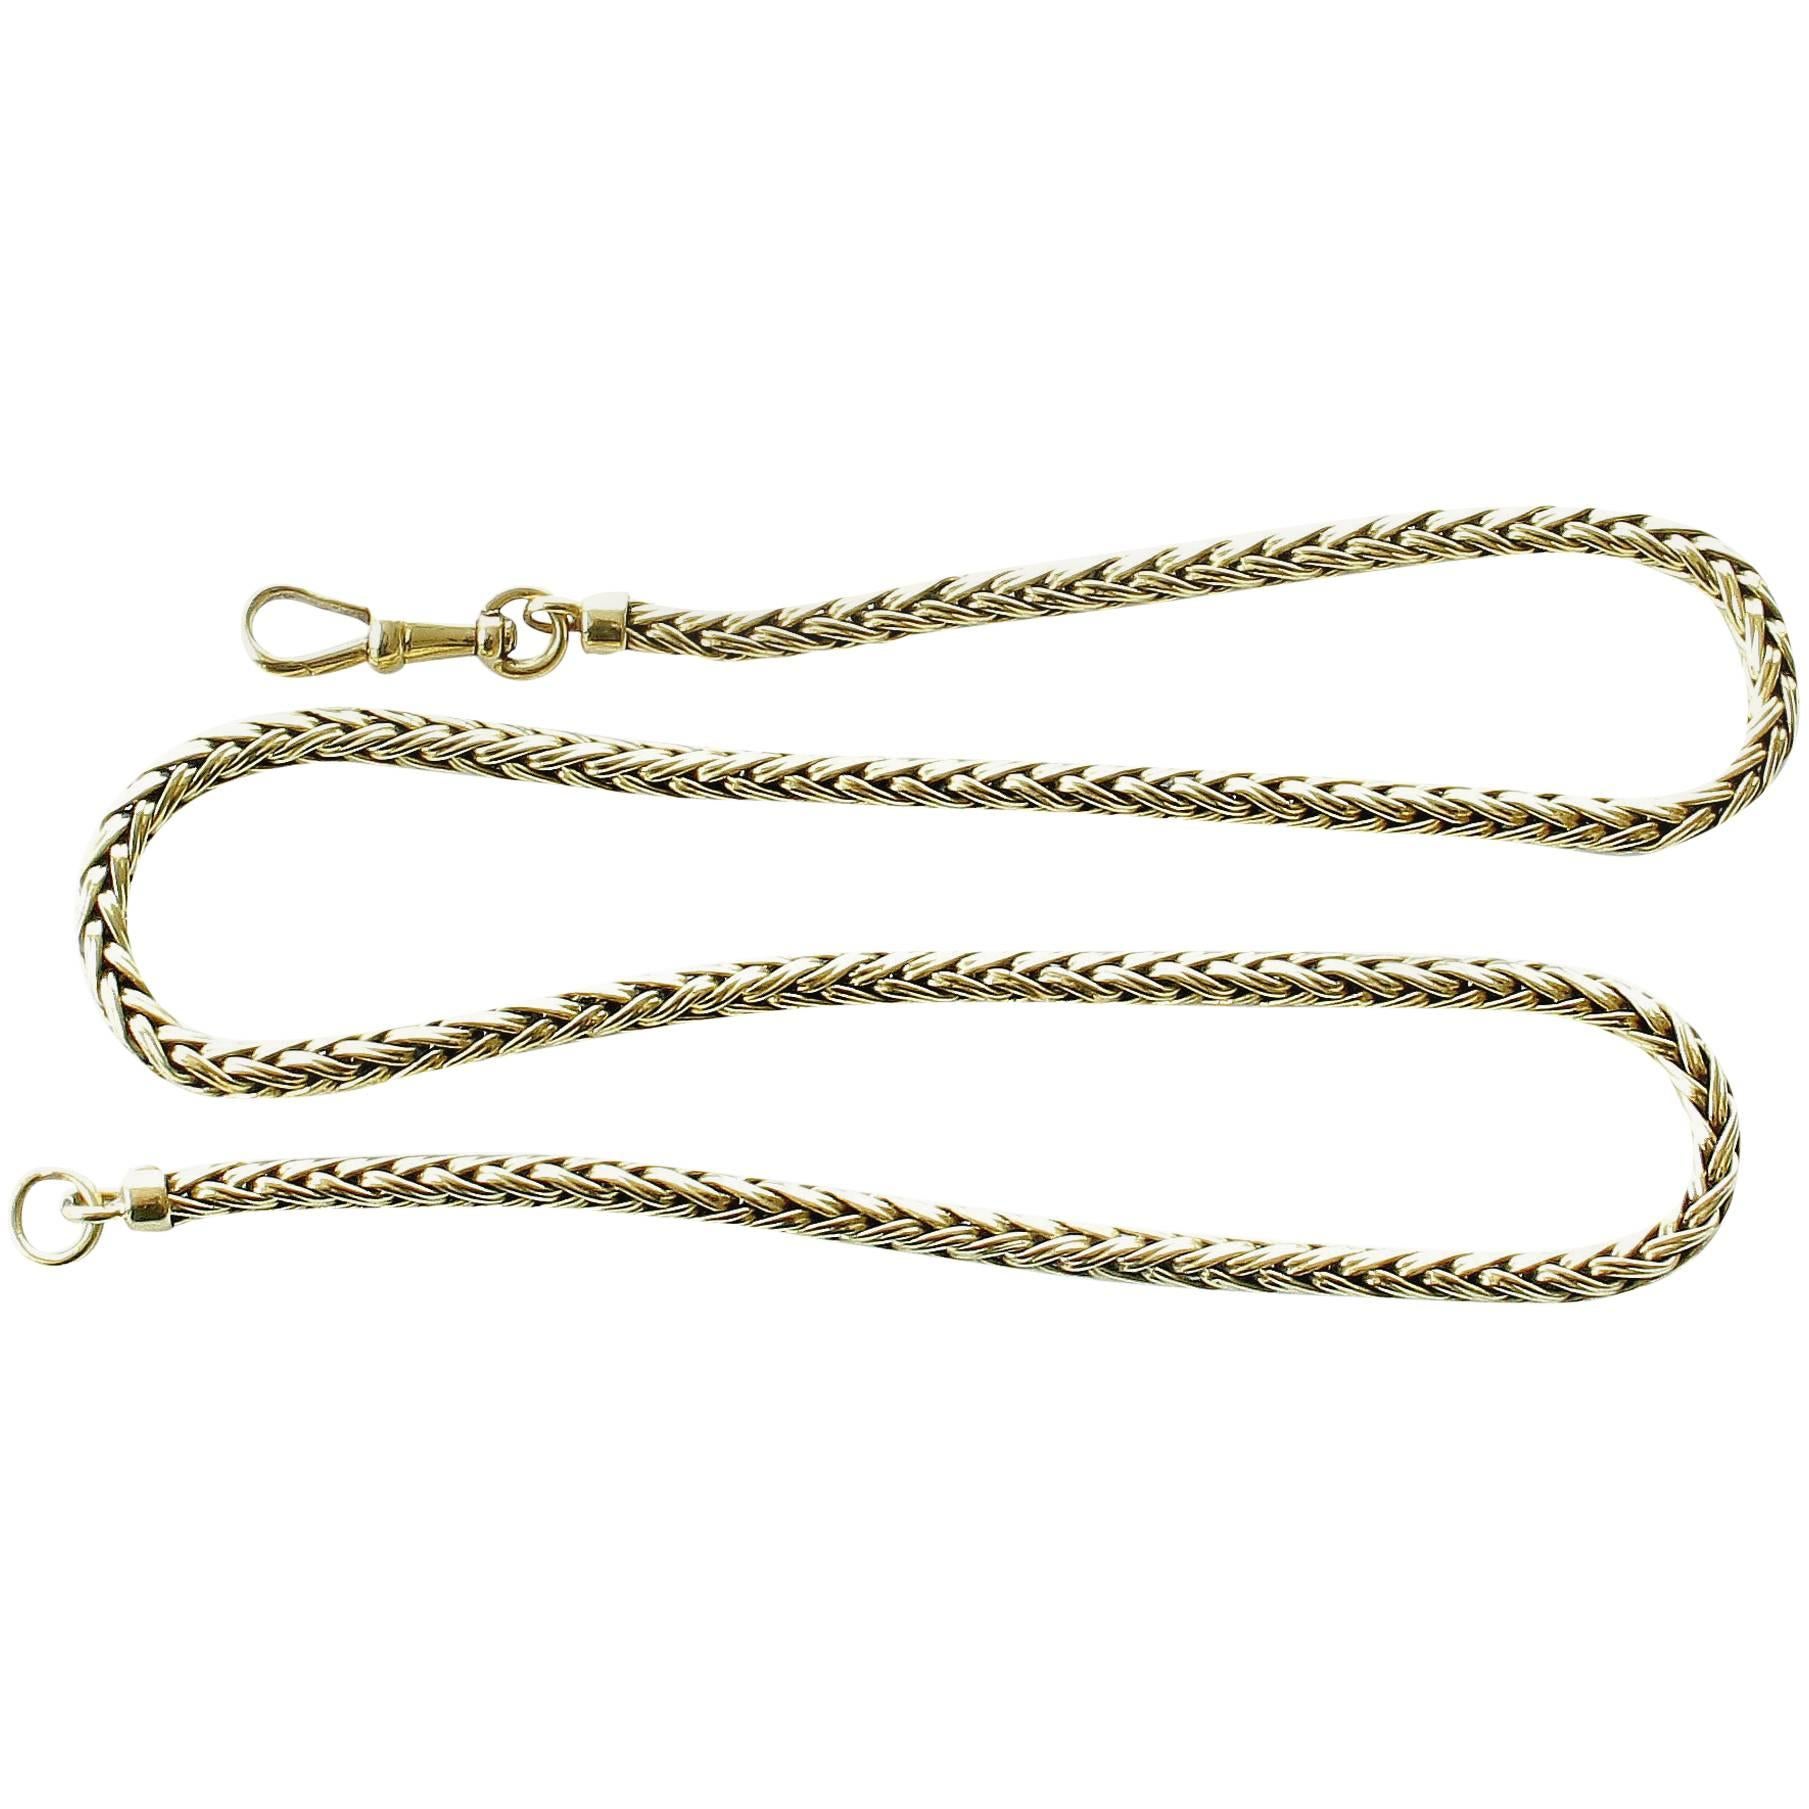 1960s French Braided 18 Karat Gold Necklace